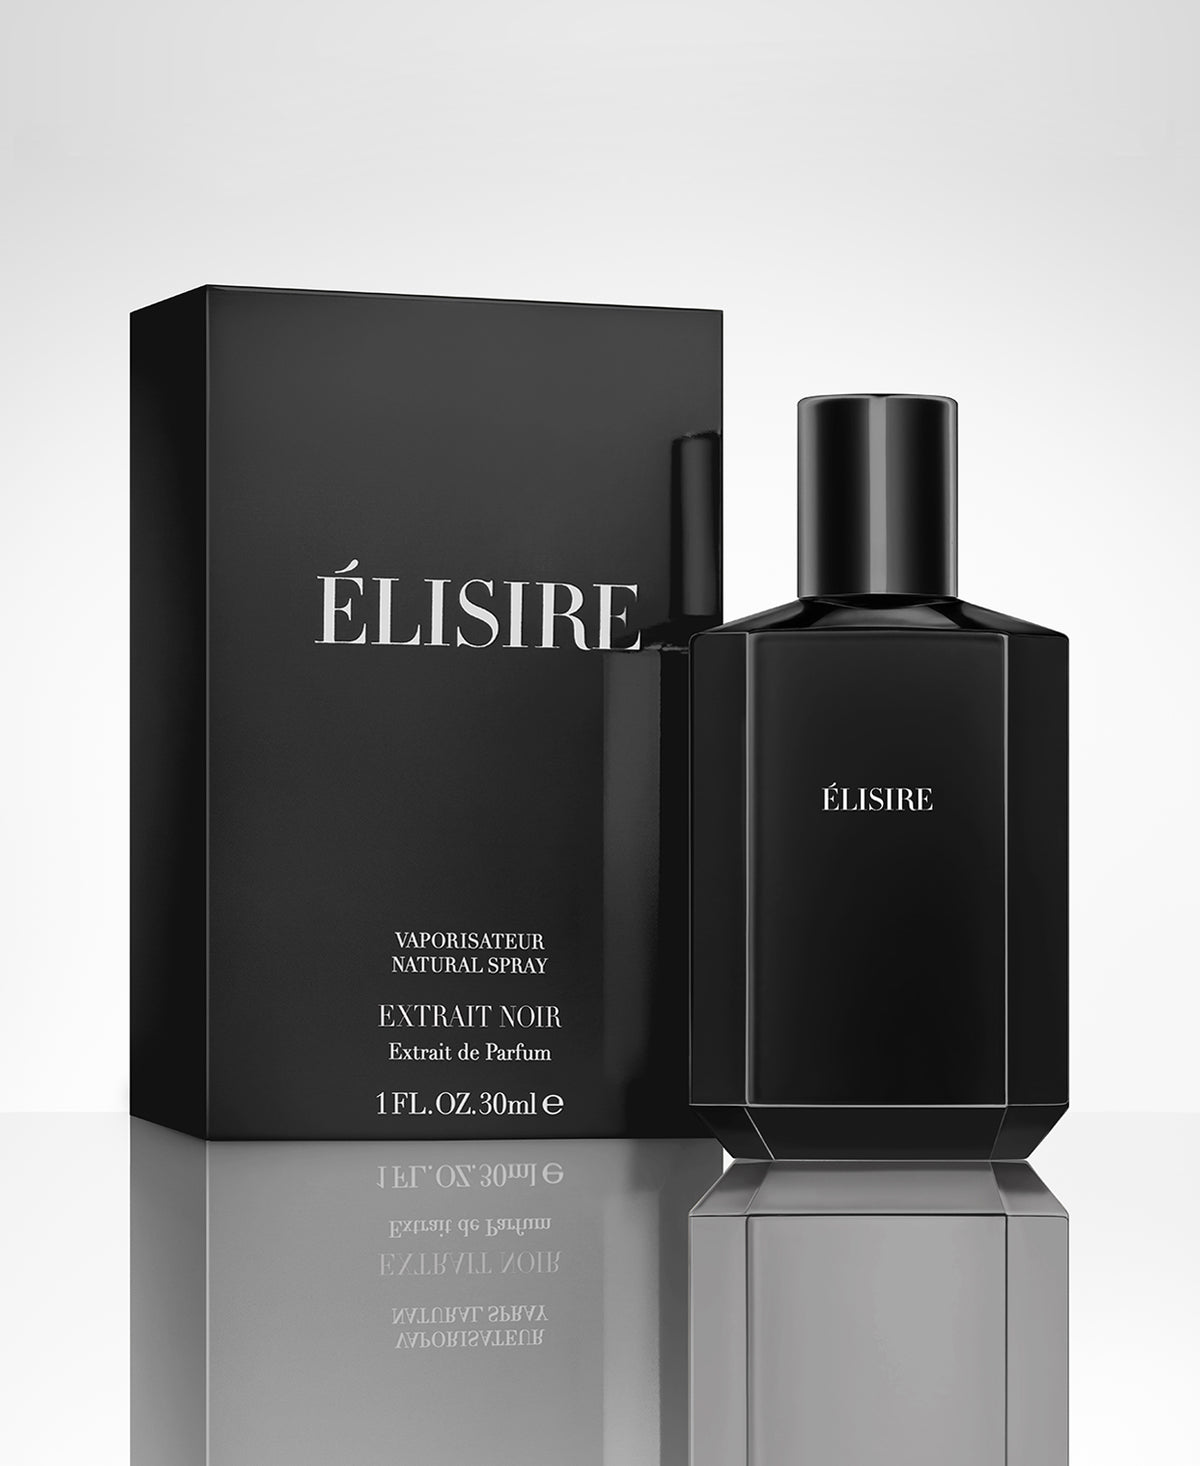 ELISIRE AMBRE NOMADE FRAGRANCE / PERFUME REVIEW + FULL BOTTLE